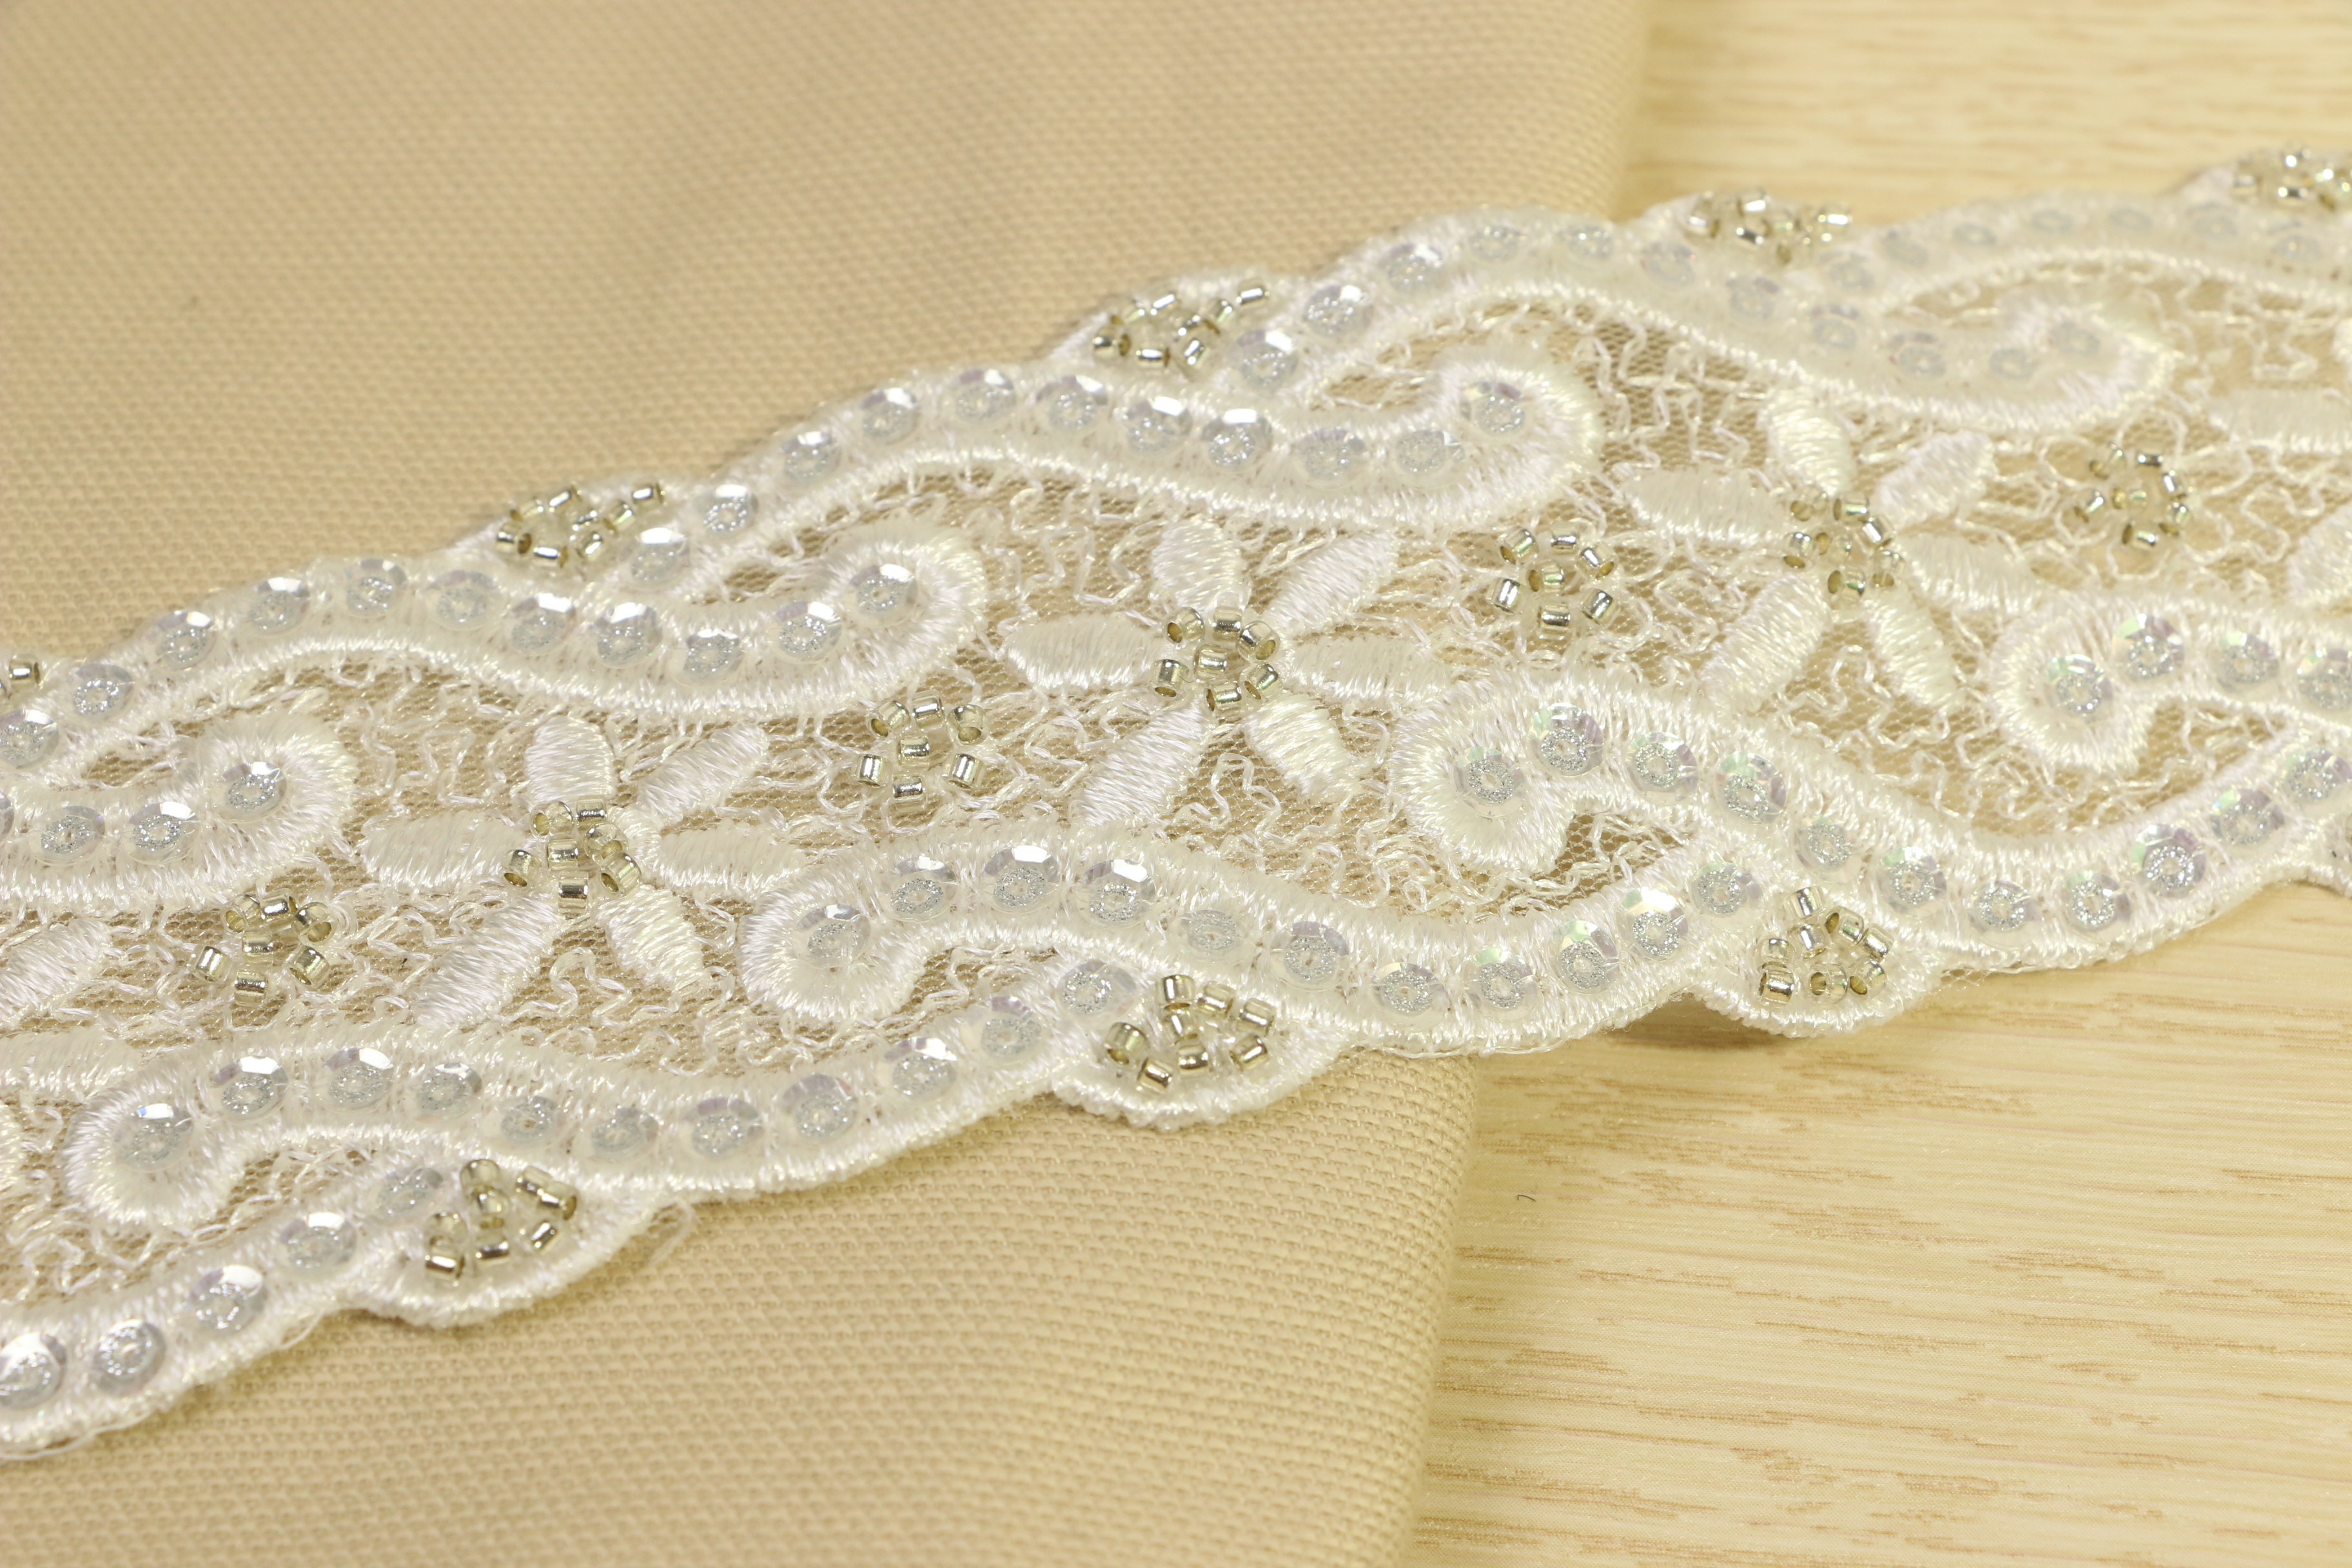  Crochet Ivory Lace Ribbon Multi Creations 23mm Width Bugles Equipped Manufactures